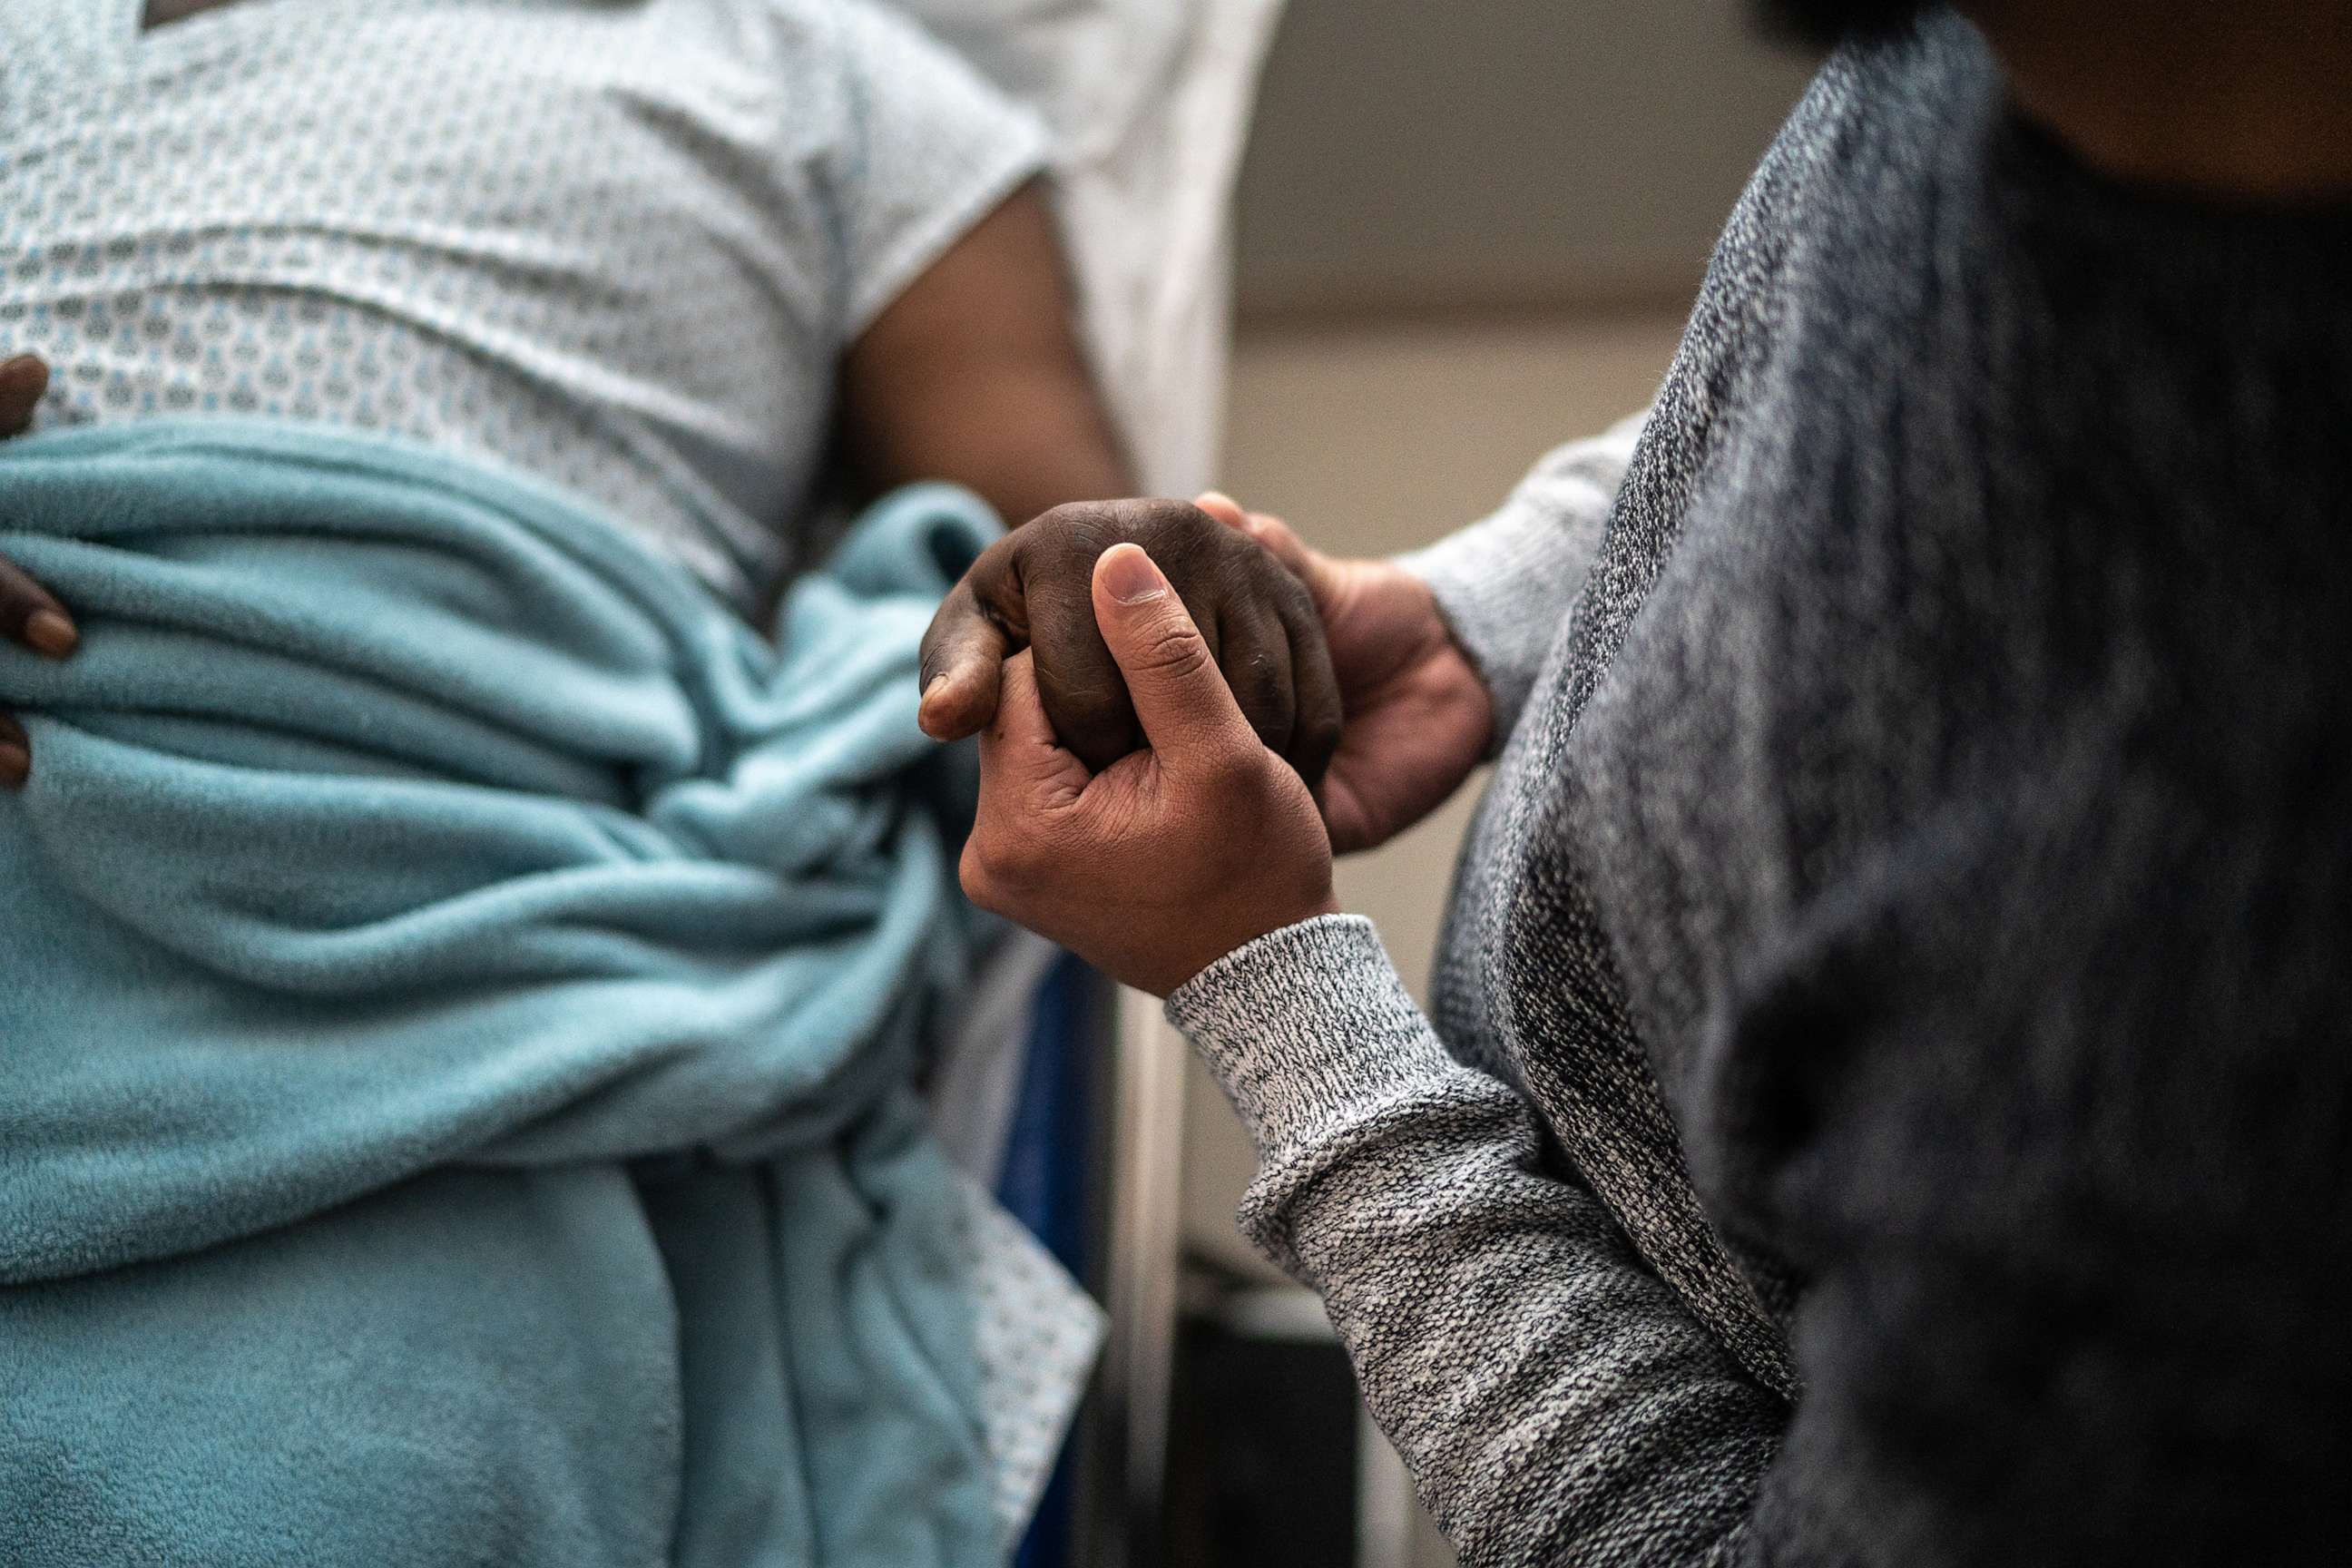 PHOTO: Son holding father's hand at the hospital